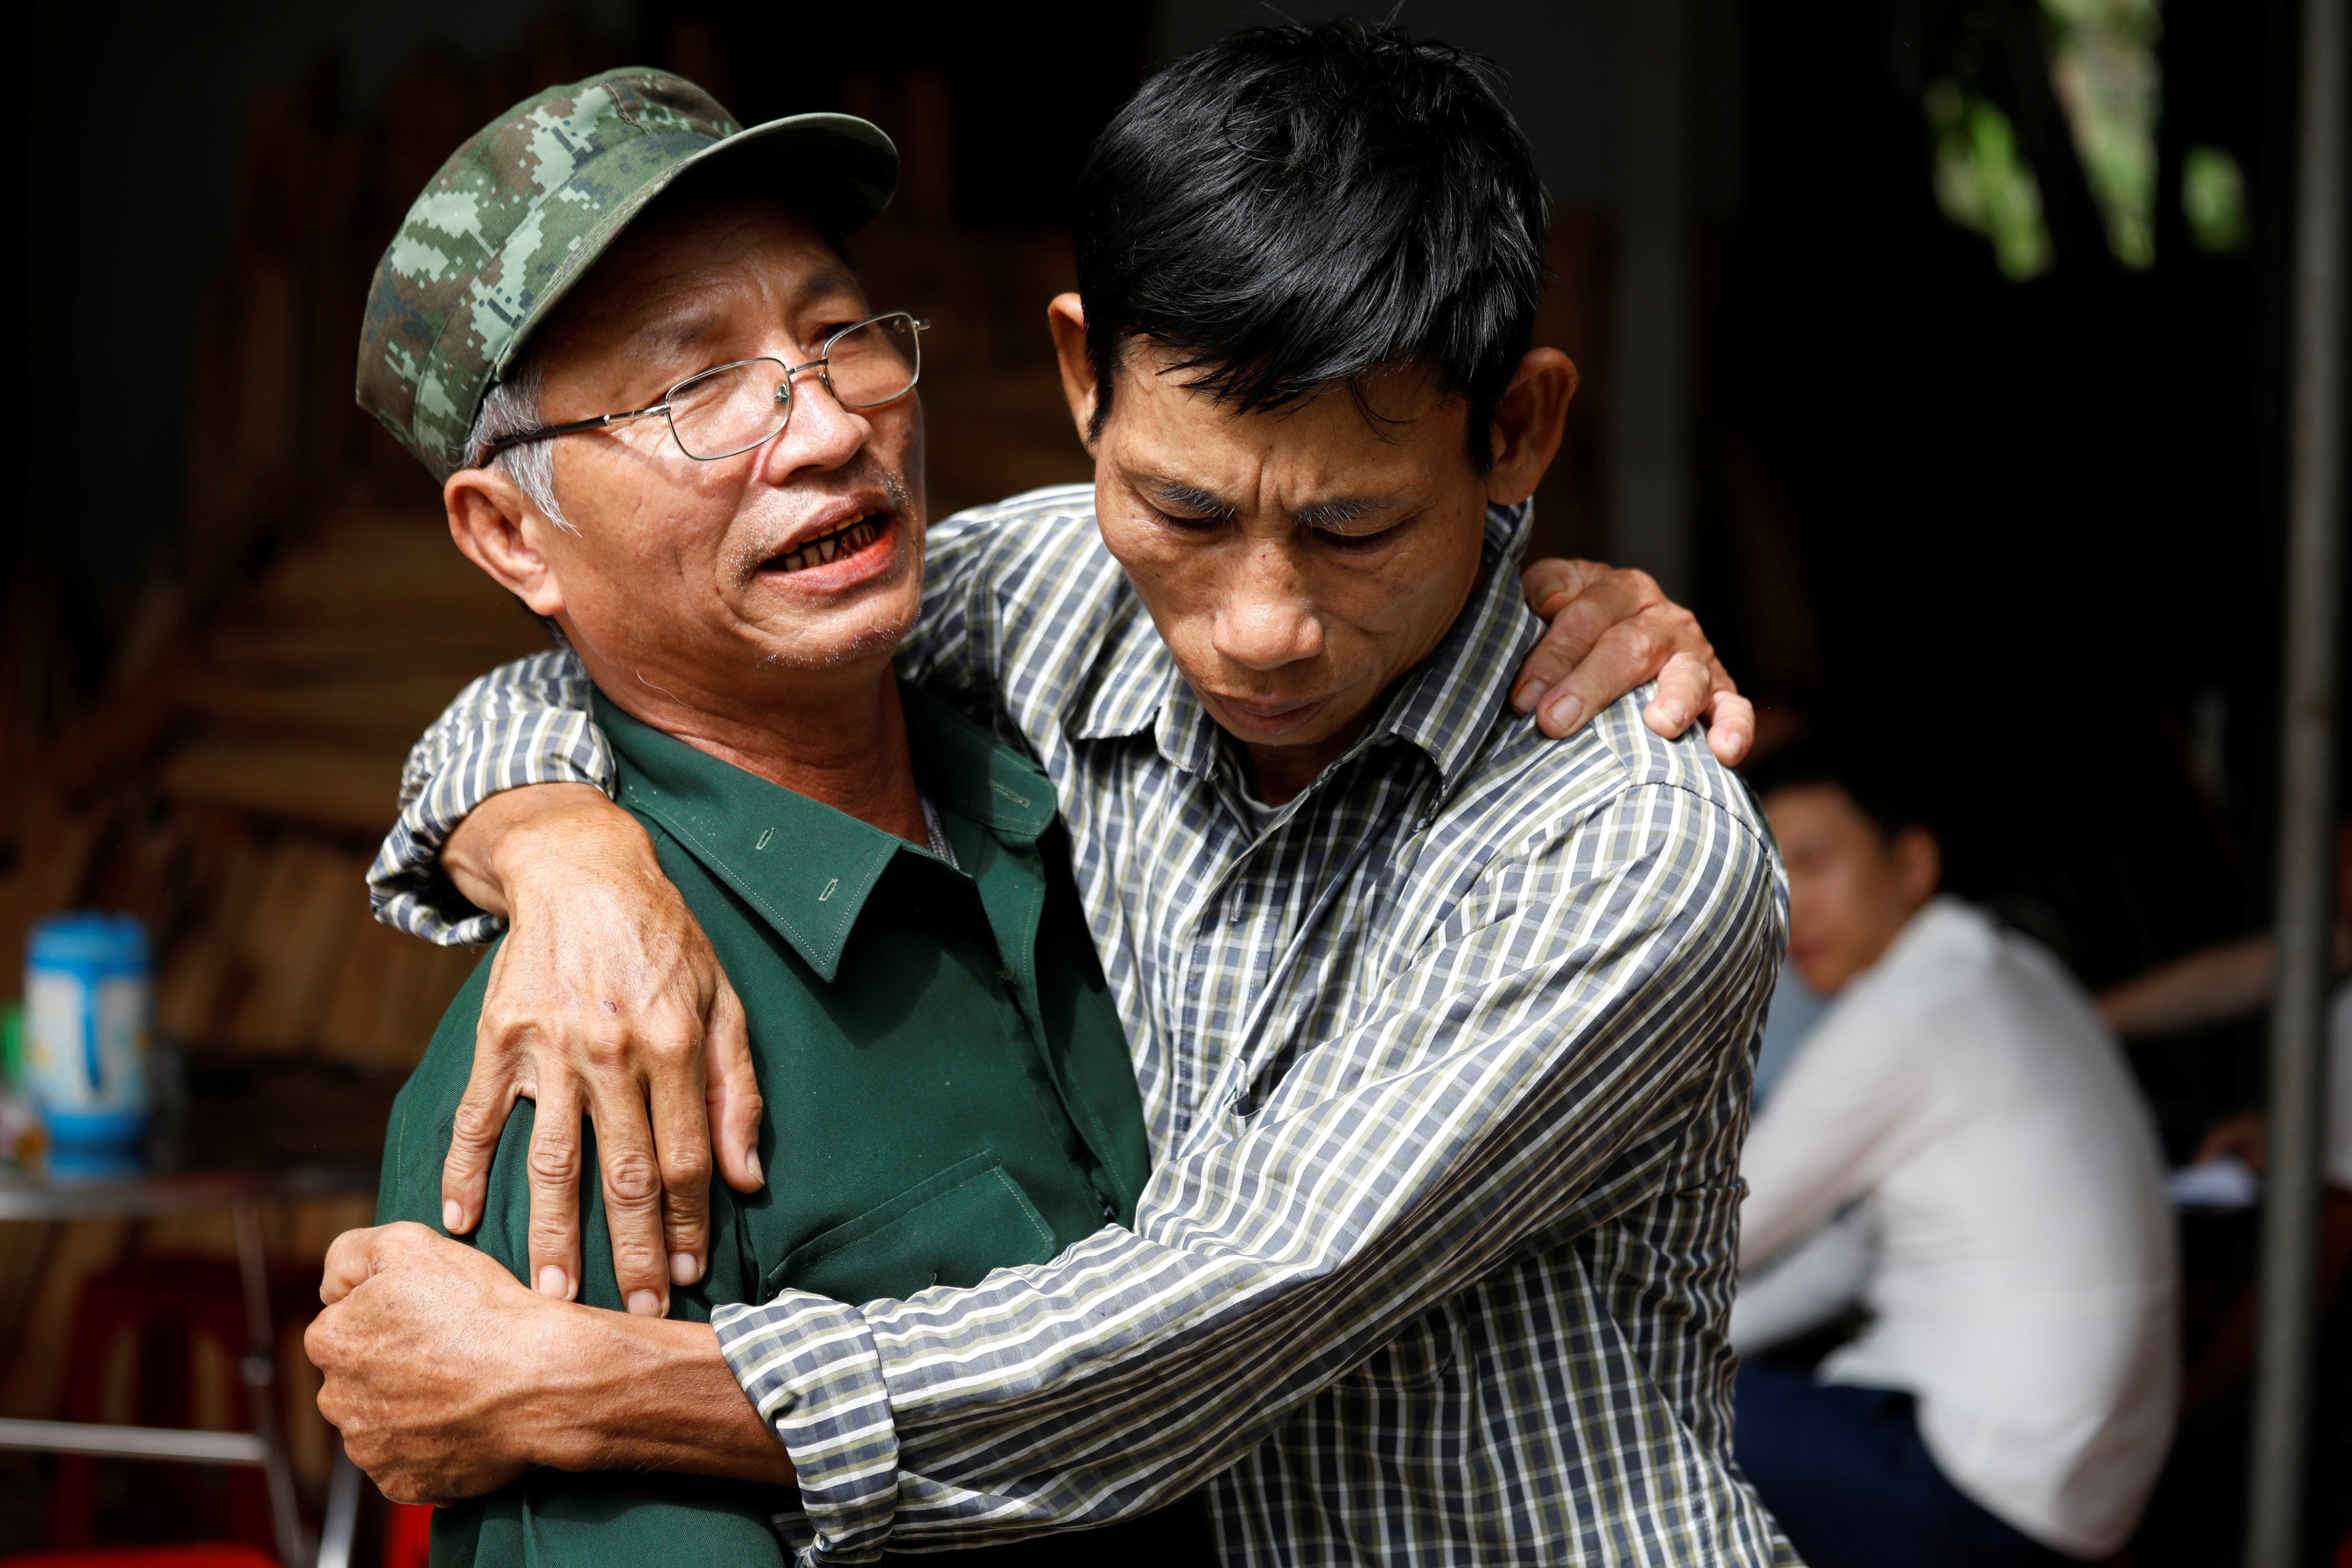 Nguyen Dinh Gia (right), father of Nguyen Dinh Luong, one of the suspected truck death victims, is embraced by a friend at his home in Ha Tinh province, Vietnam, on Sunday. Photo: Reuters